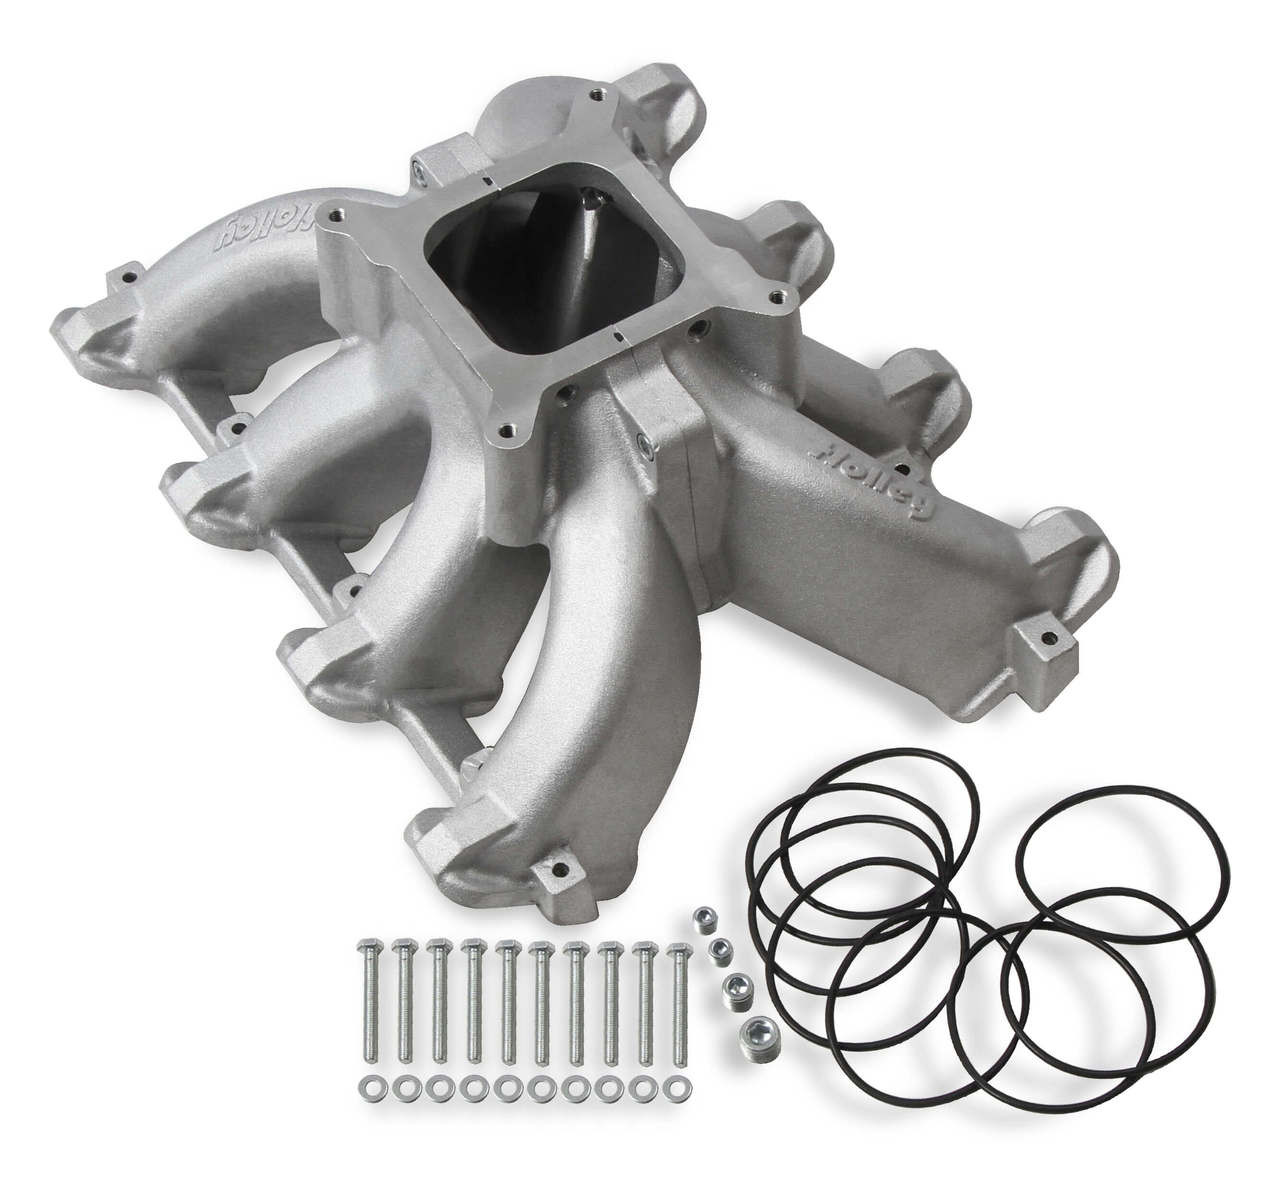 Holley 300-256 Split Race Single Plane Carbureted Intake Manifold - Cathedral Port